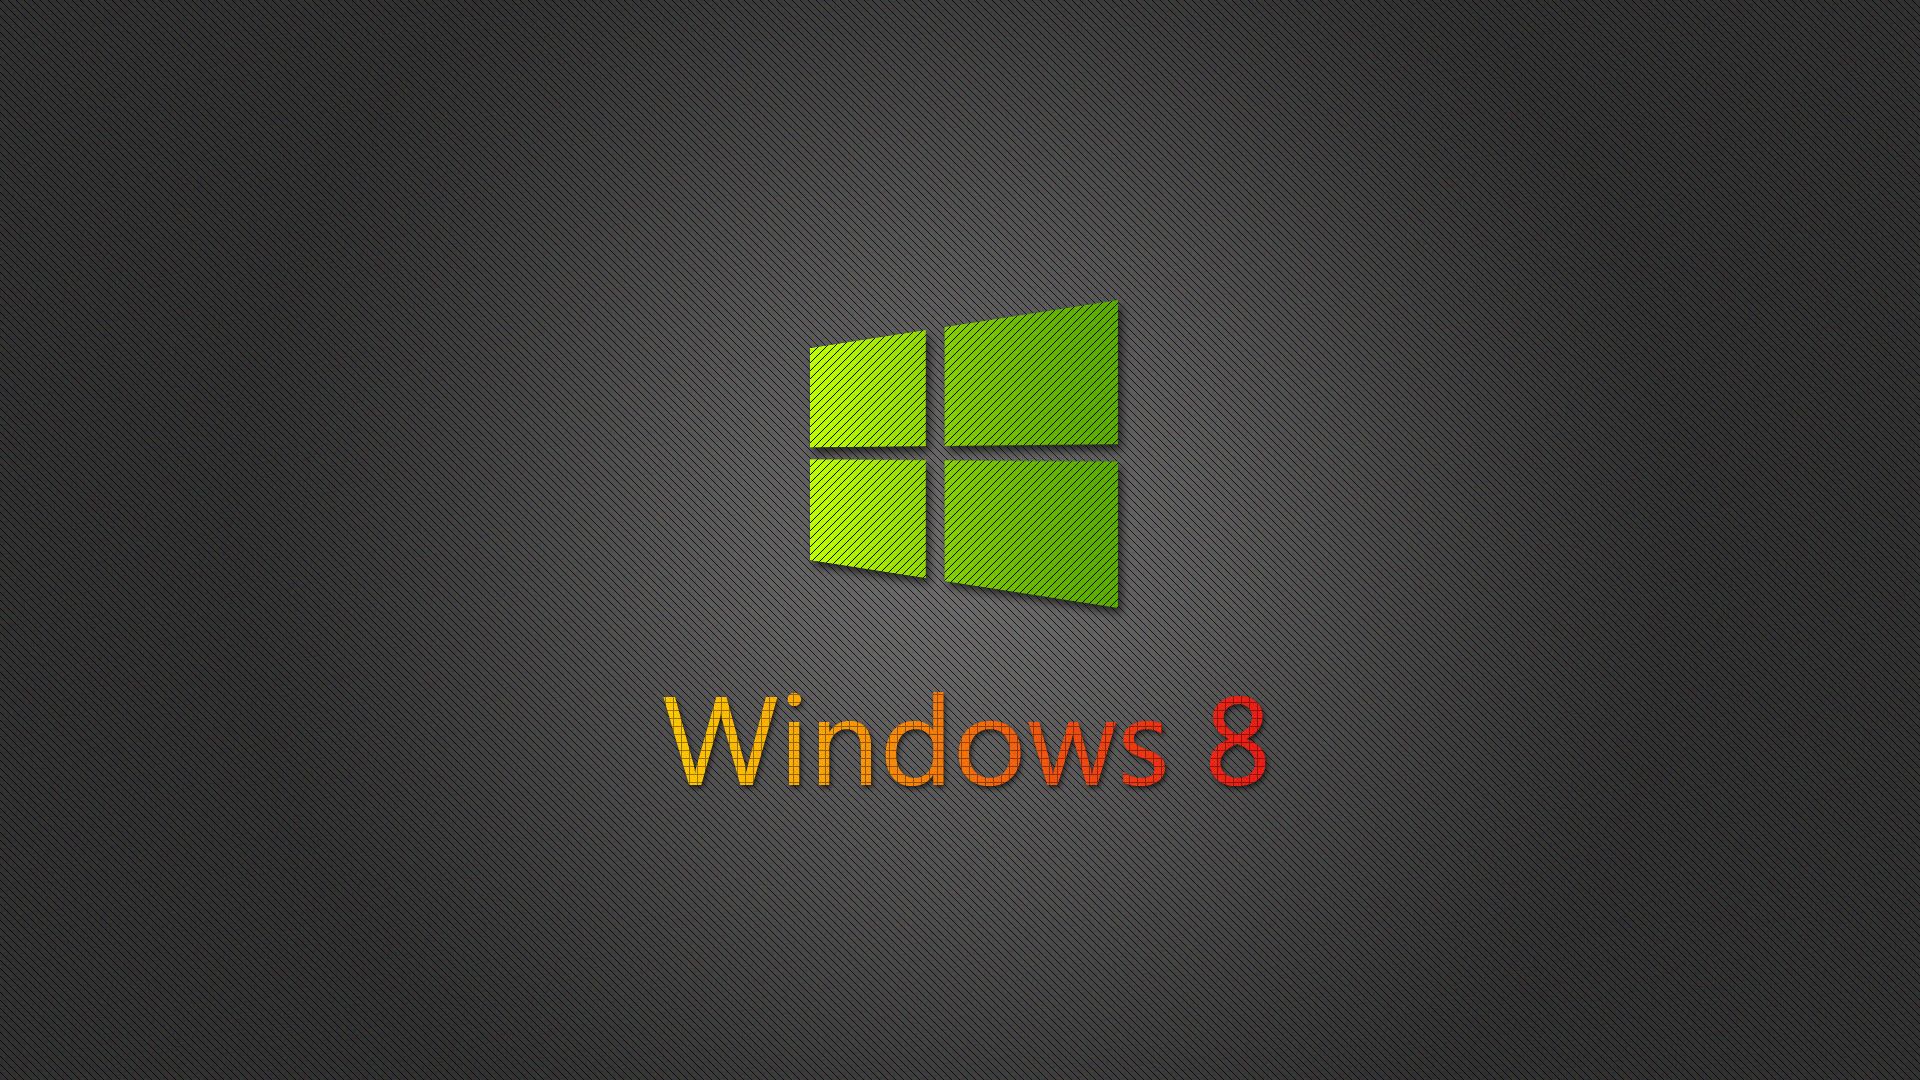 Windows 8 | Awesome Wallpapers | Page 2